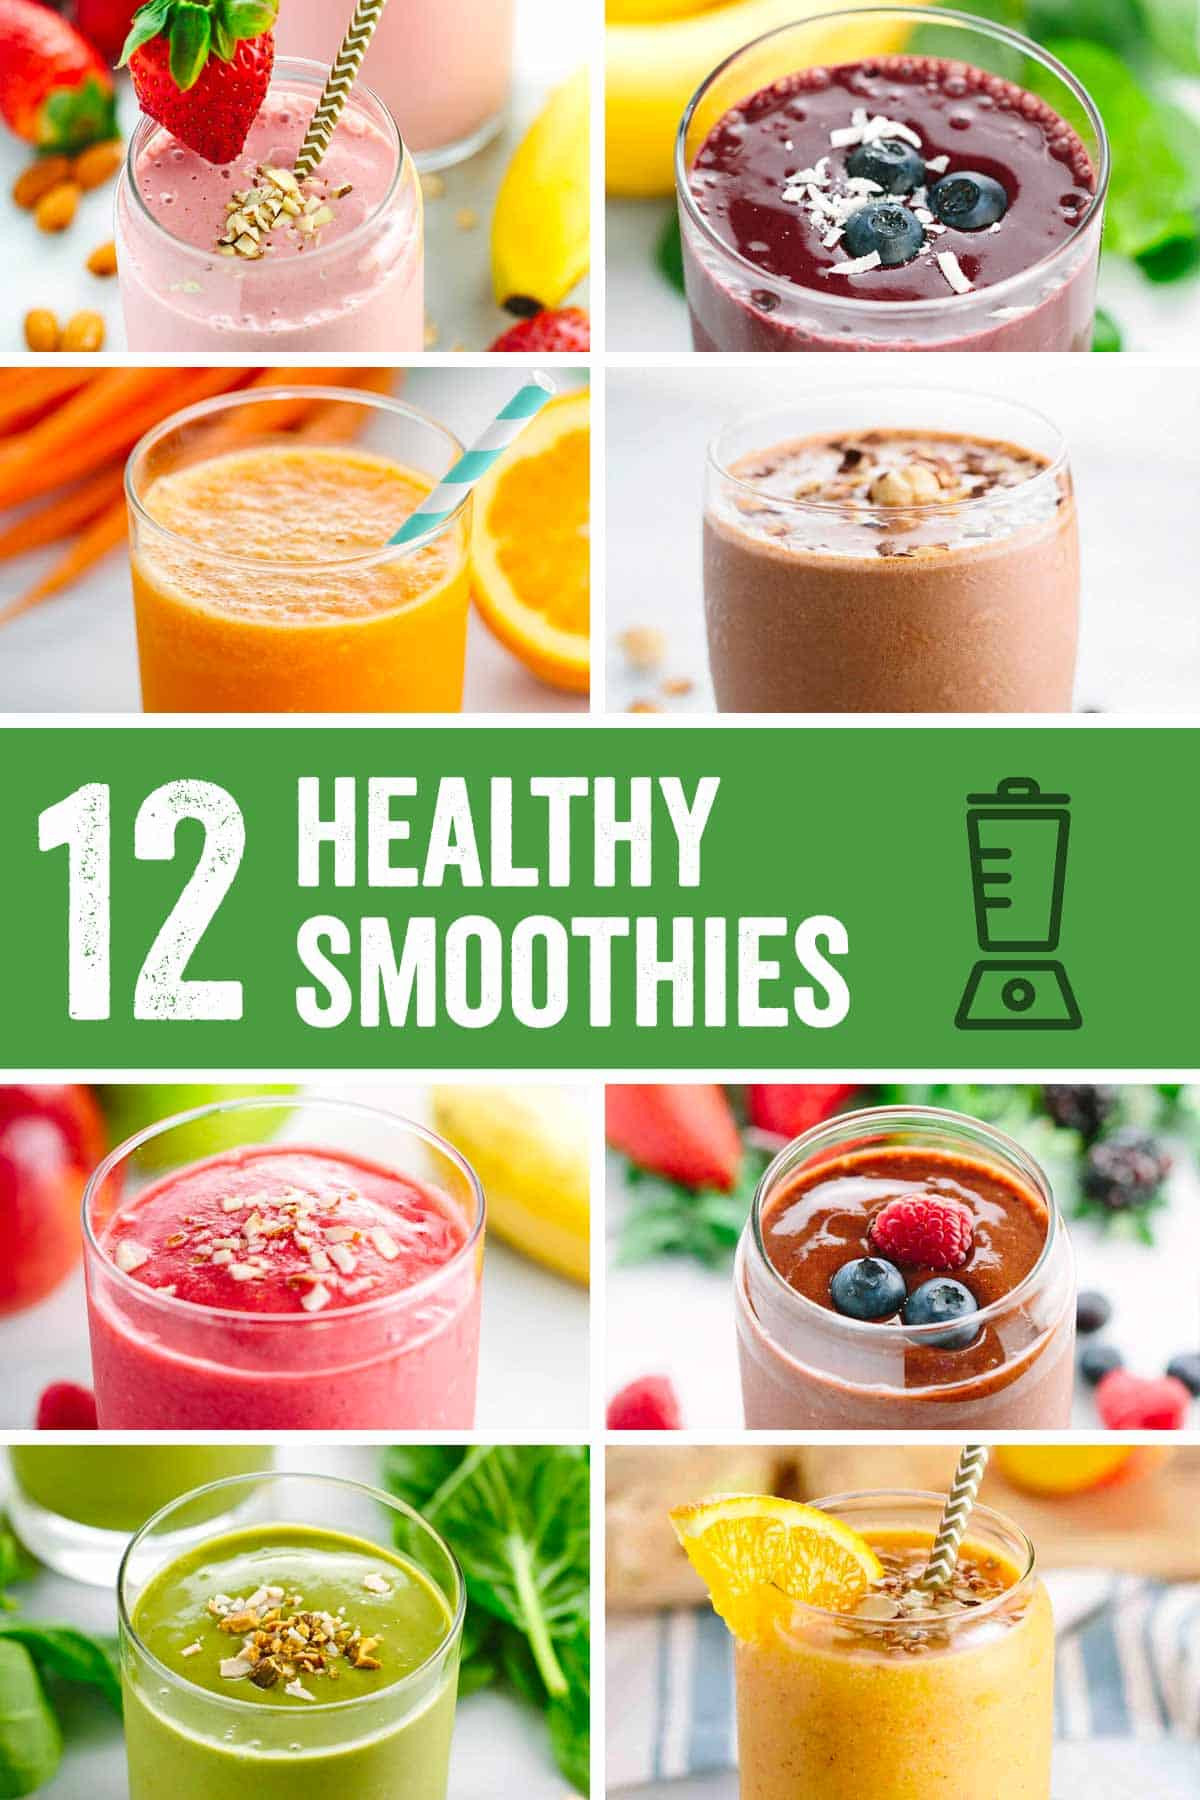 Smoothie Healthy Recipes
 Roundup Easy Five Minute Healthy Smoothie Recipes